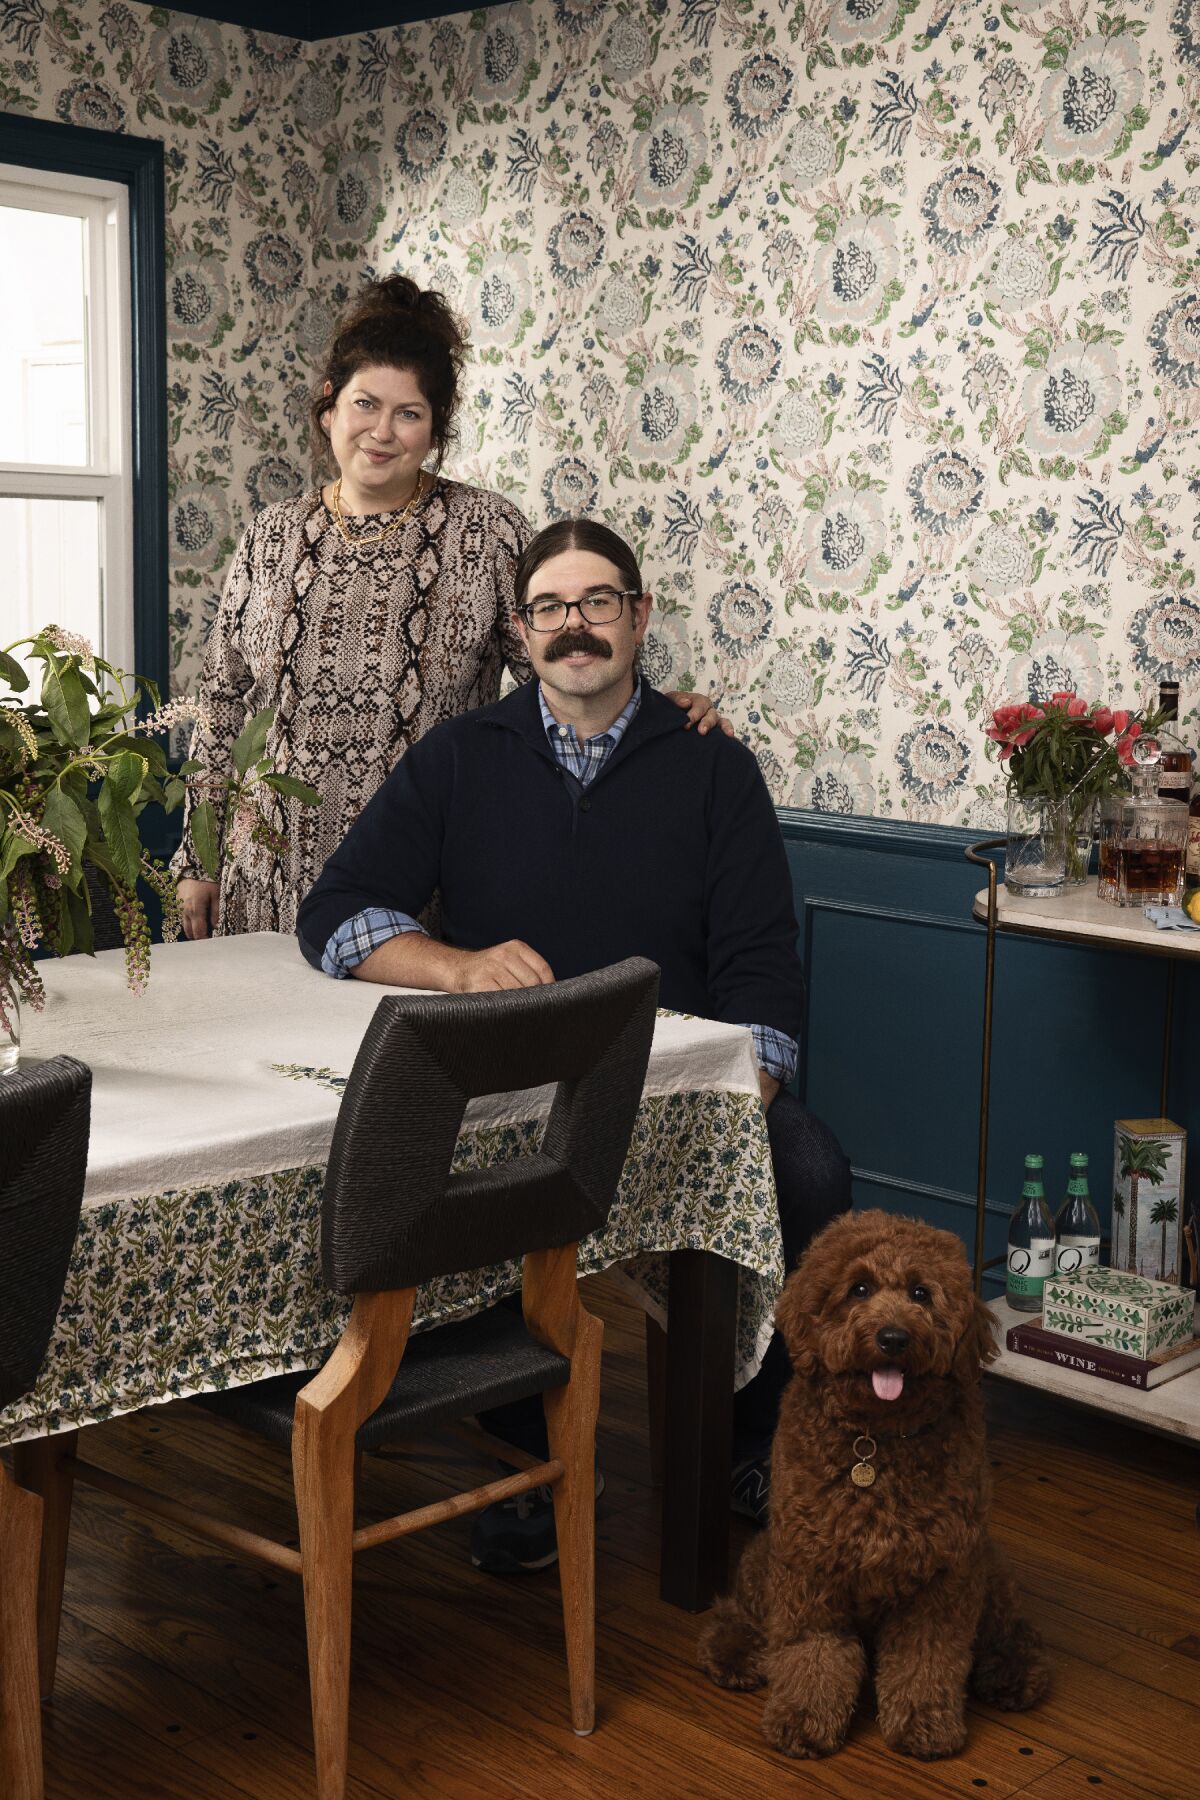 A man and woman and their dog pose in their decorated dining room.